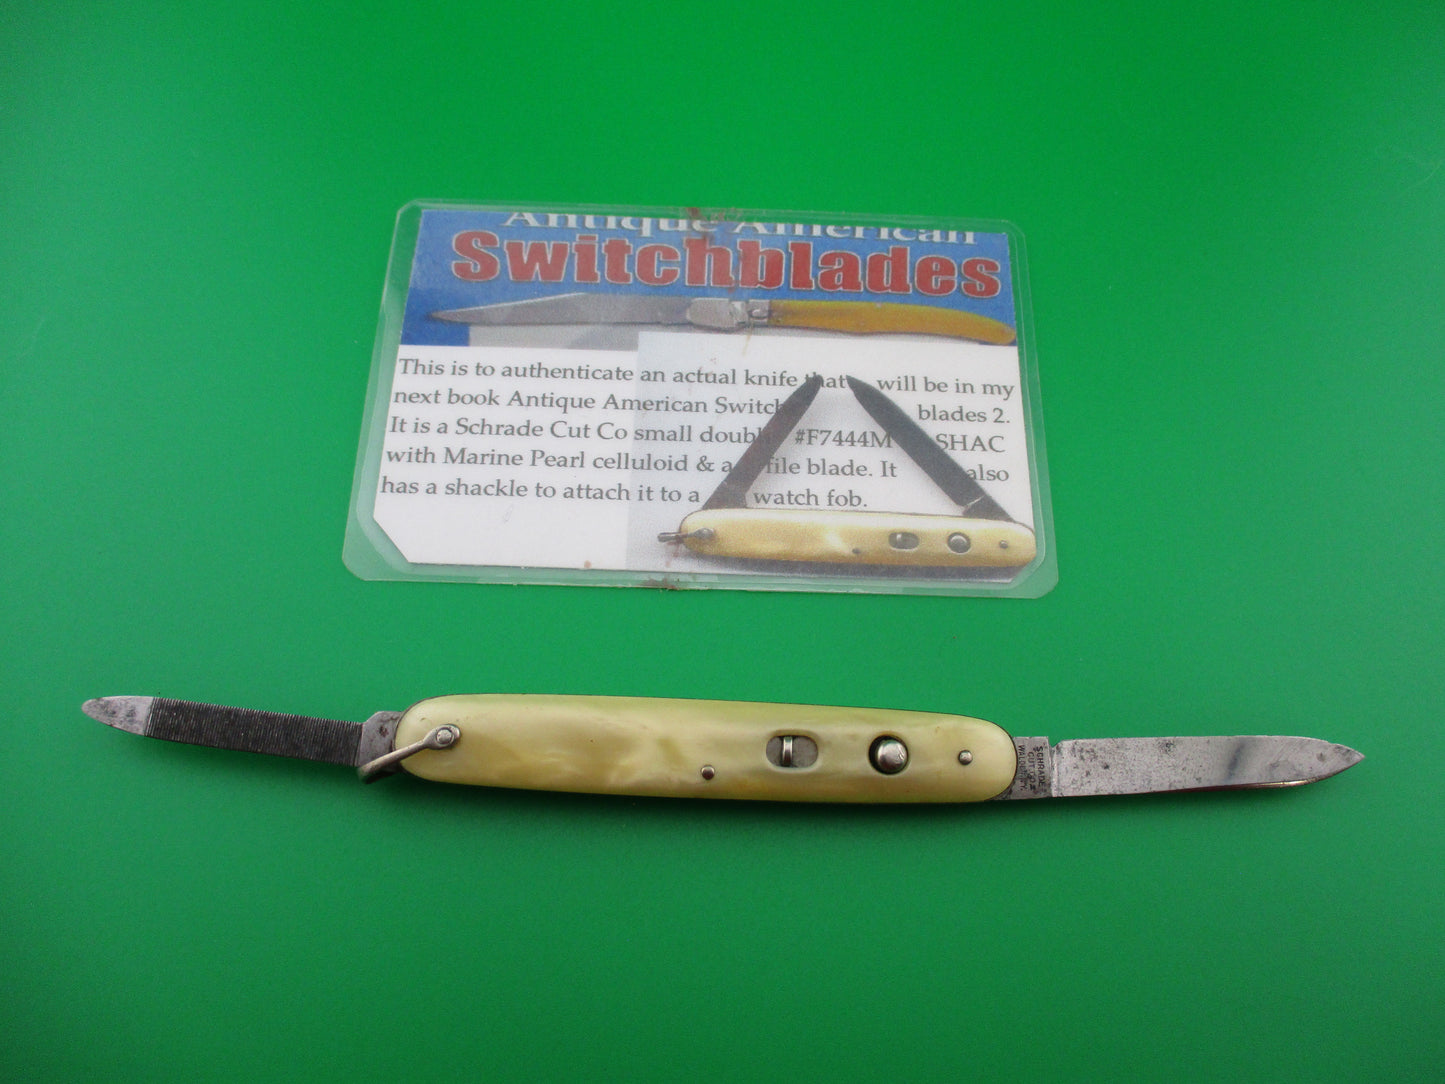 Schrade Cut Co Marine Pearl small double w shackle & file blade